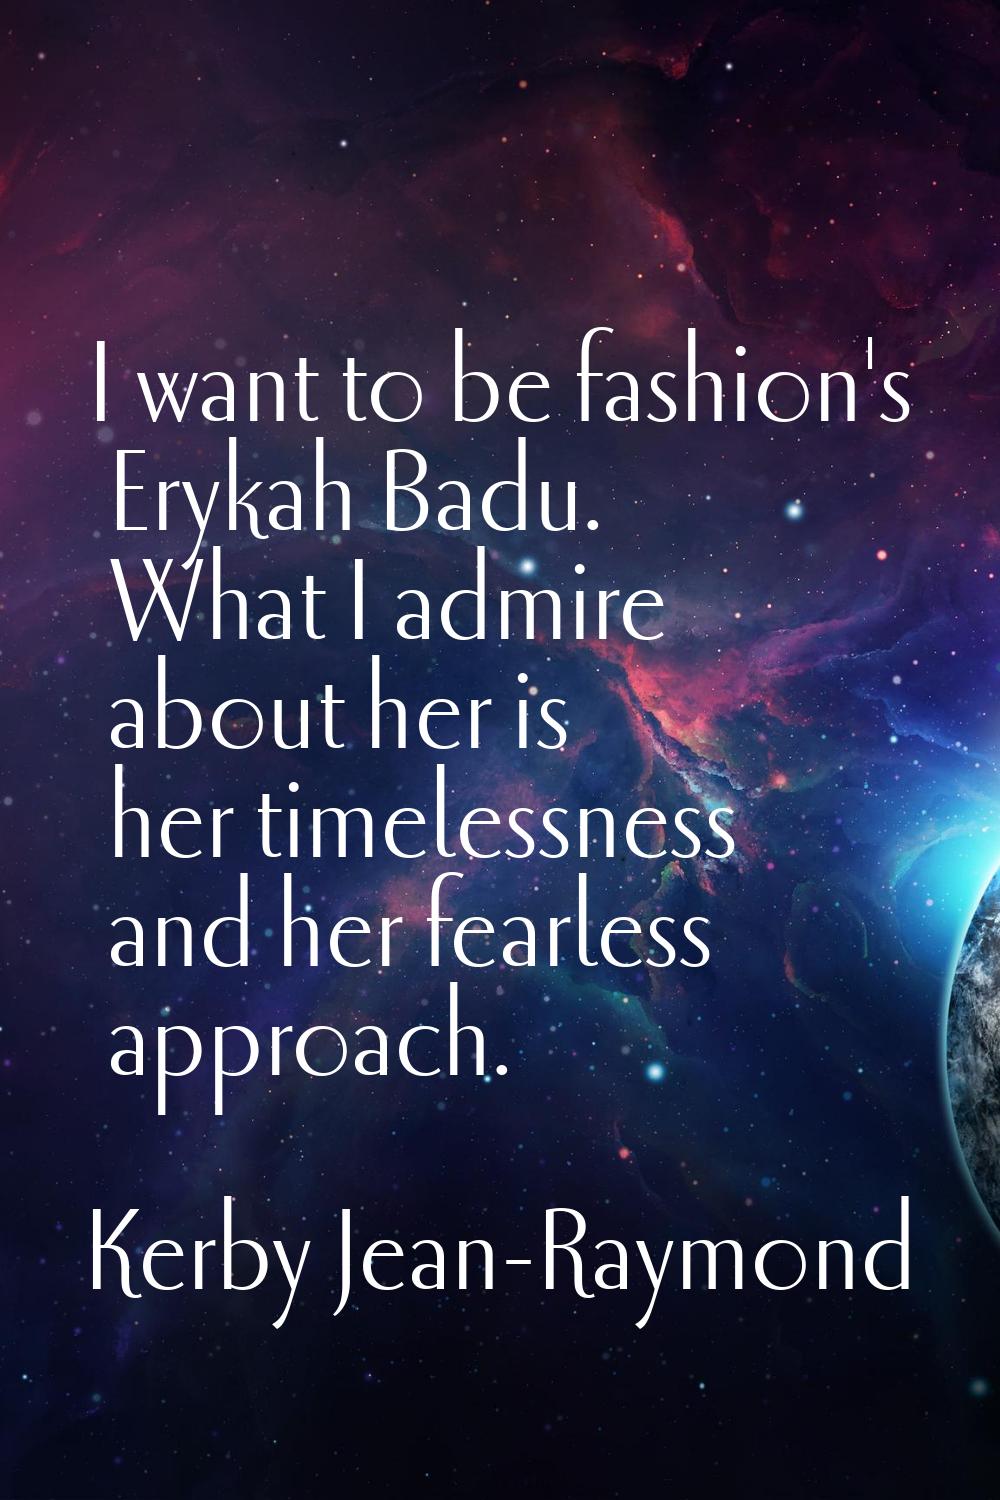 I want to be fashion's Erykah Badu. What I admire about her is her timelessness and her fearless ap